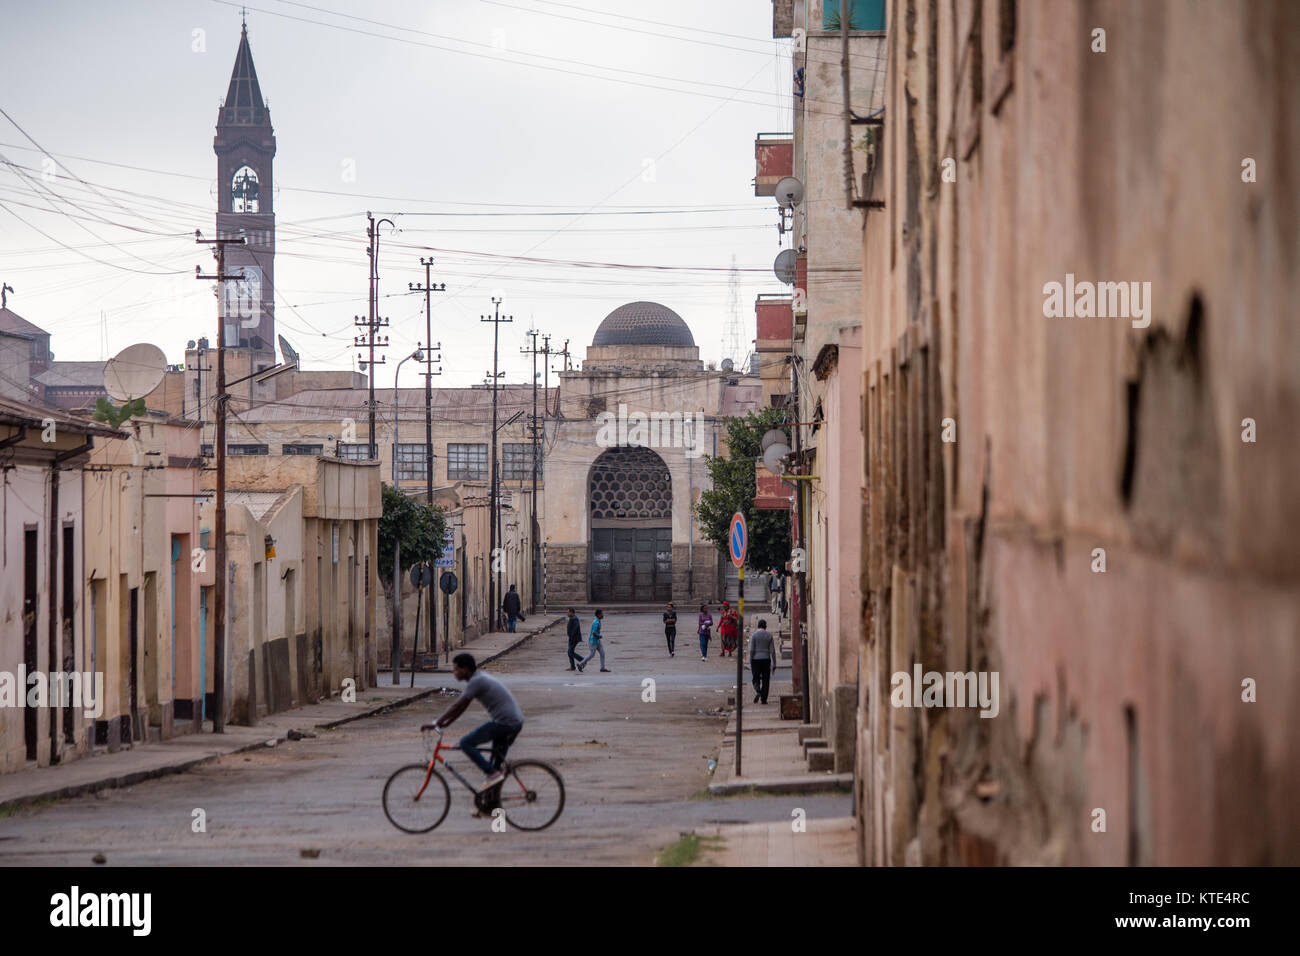 A man on a bicycle cross a street in the city of Asmara, Eritrea on the Horn of Africa. Stock Photo